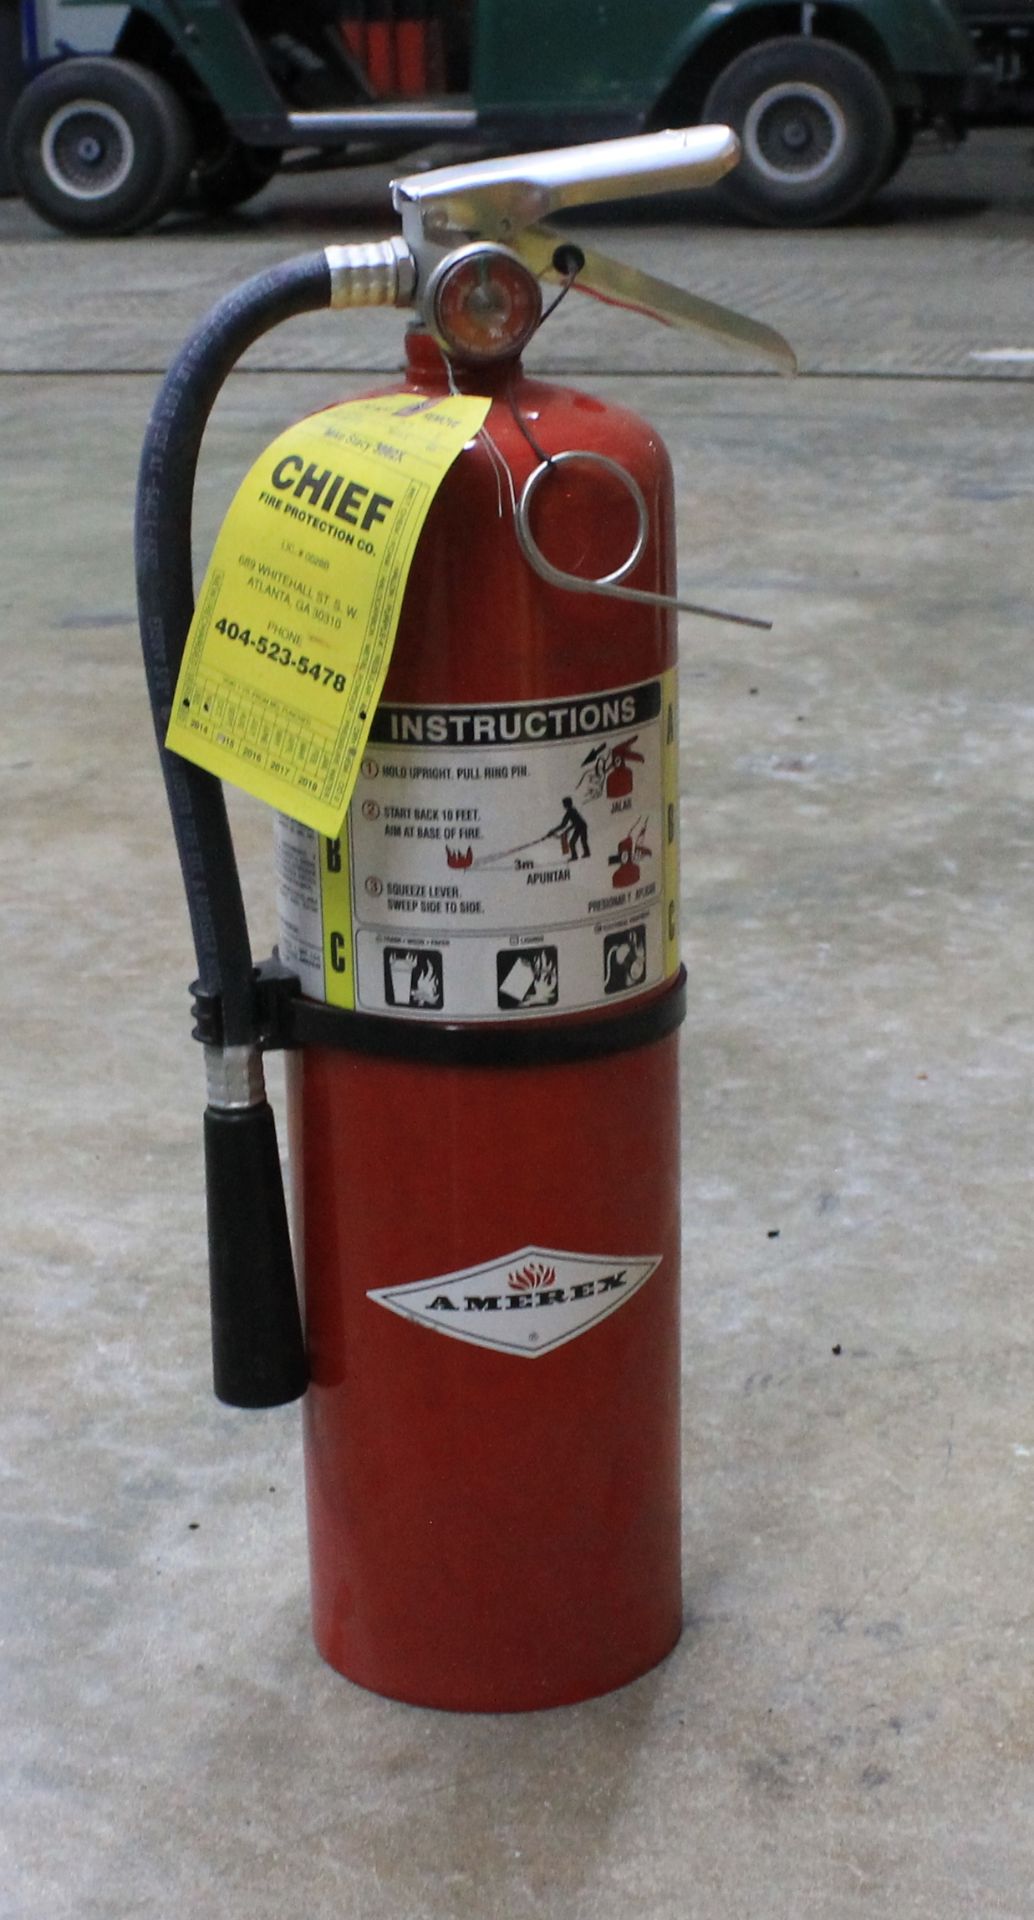 5 PCS OF FIRE EXTINGUISHER - CLASS ABC 10LB - Image 2 of 2